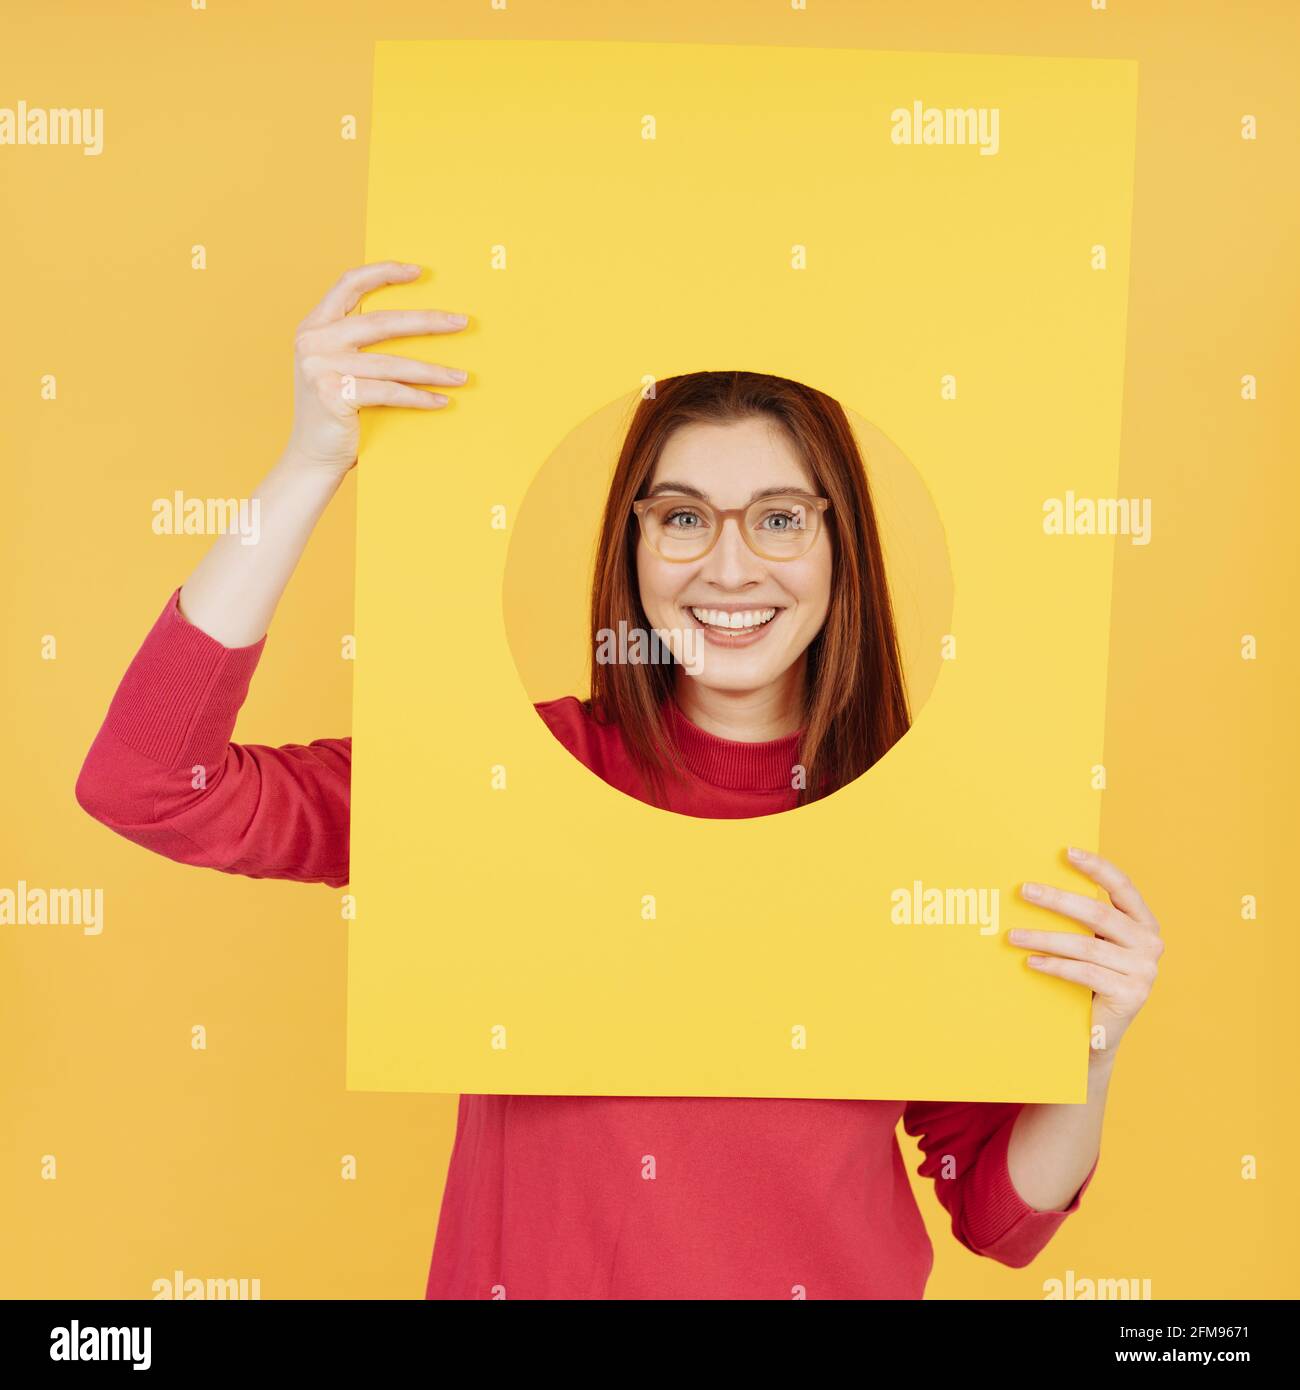 Fun playful young woman wearing glasses peering through a circular cutout in a yellow card at the camera with a mischievous smile over a matching yell Stock Photo